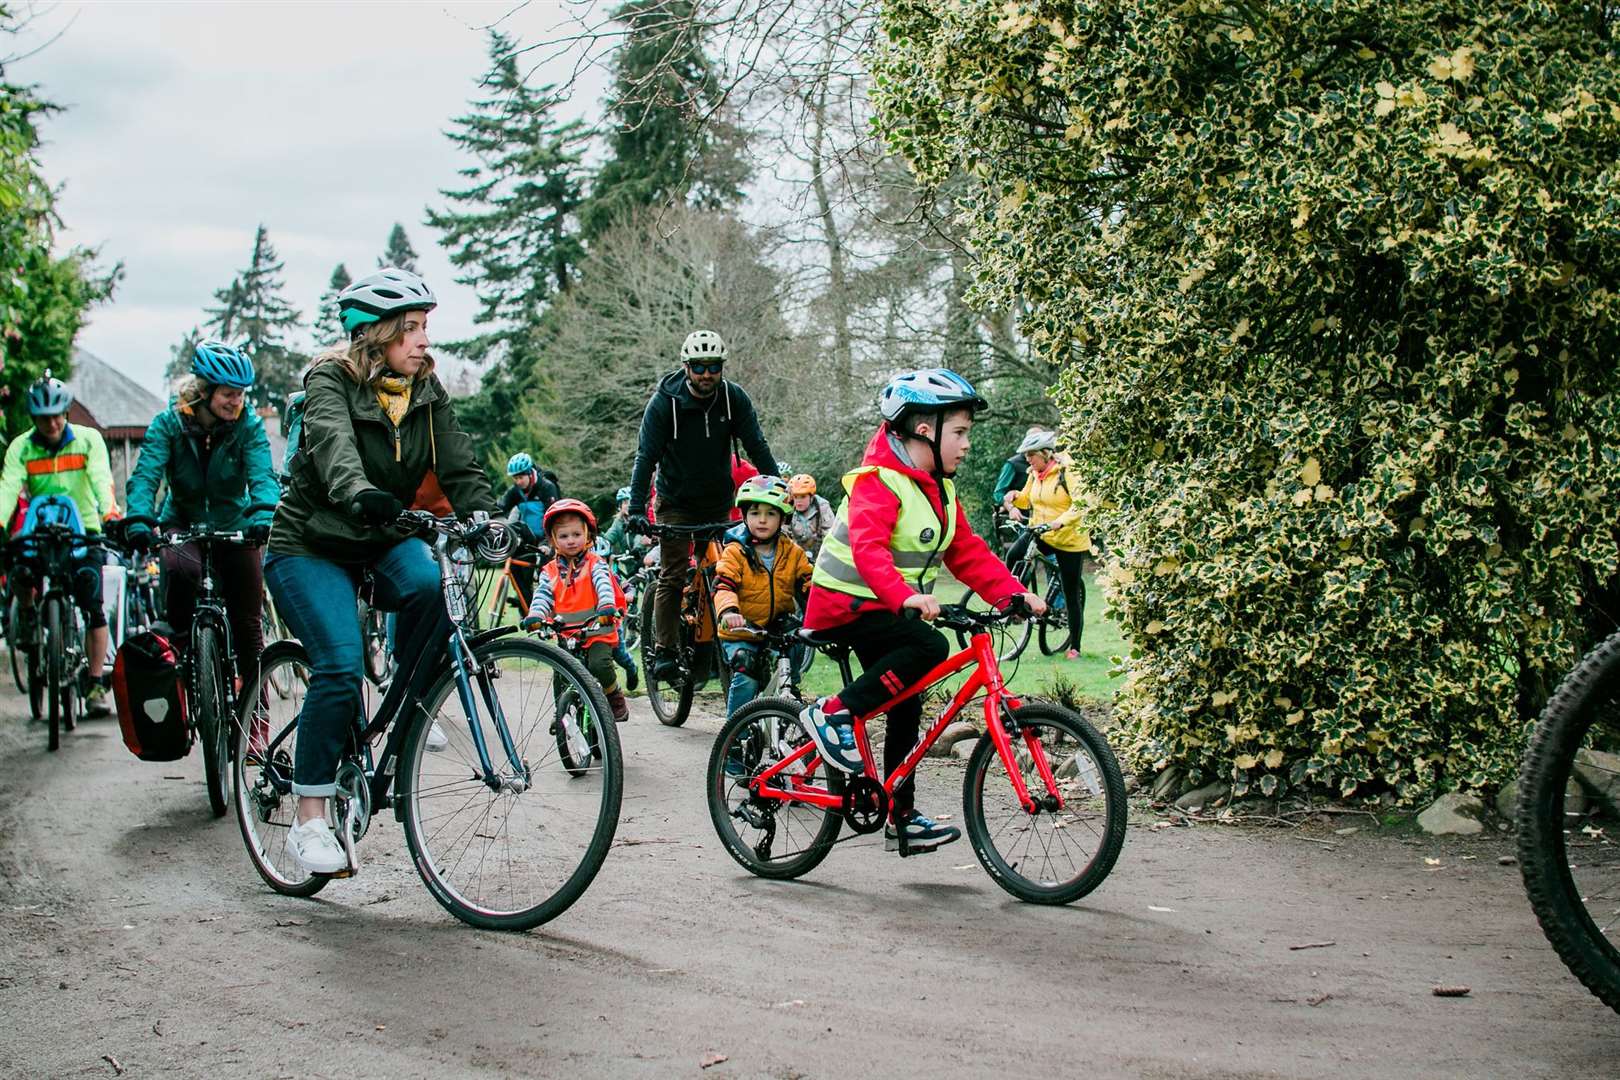 Scenes from the Kidical Mass rally in Inverness. Pictures: Katie Noble